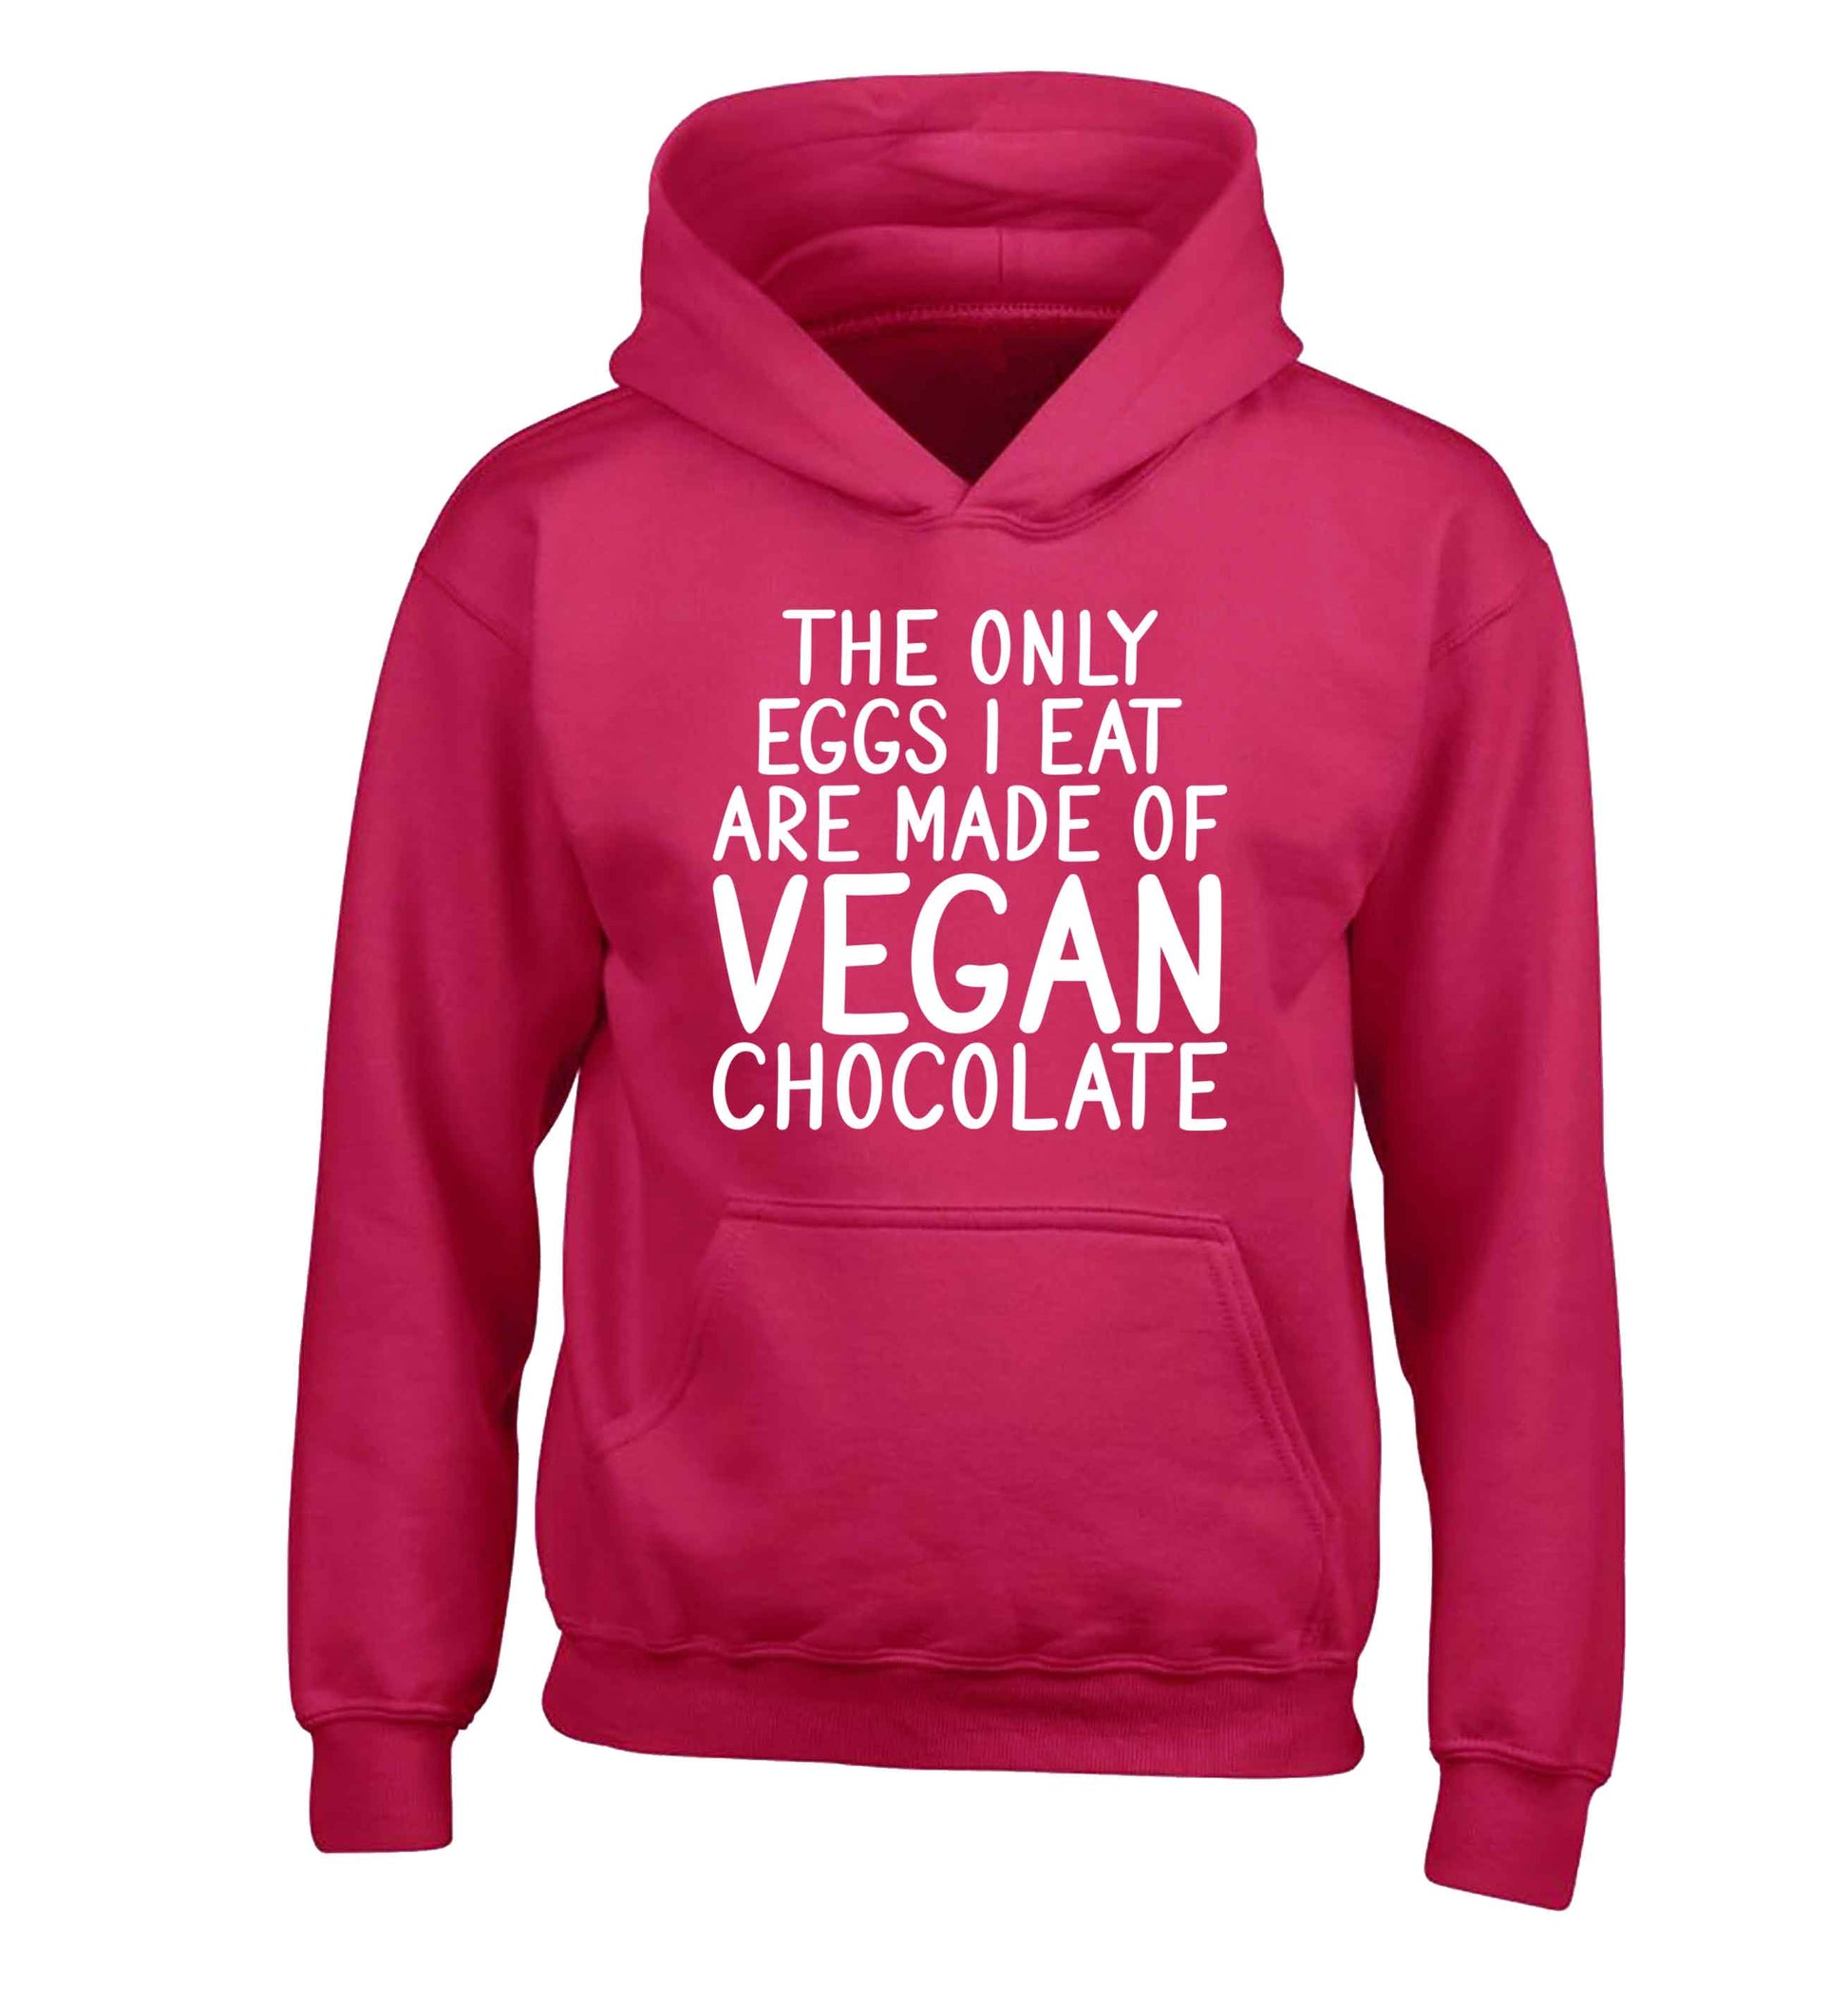 The only eggs I eat are made of vegan chocolate children's pink hoodie 12-13 Years